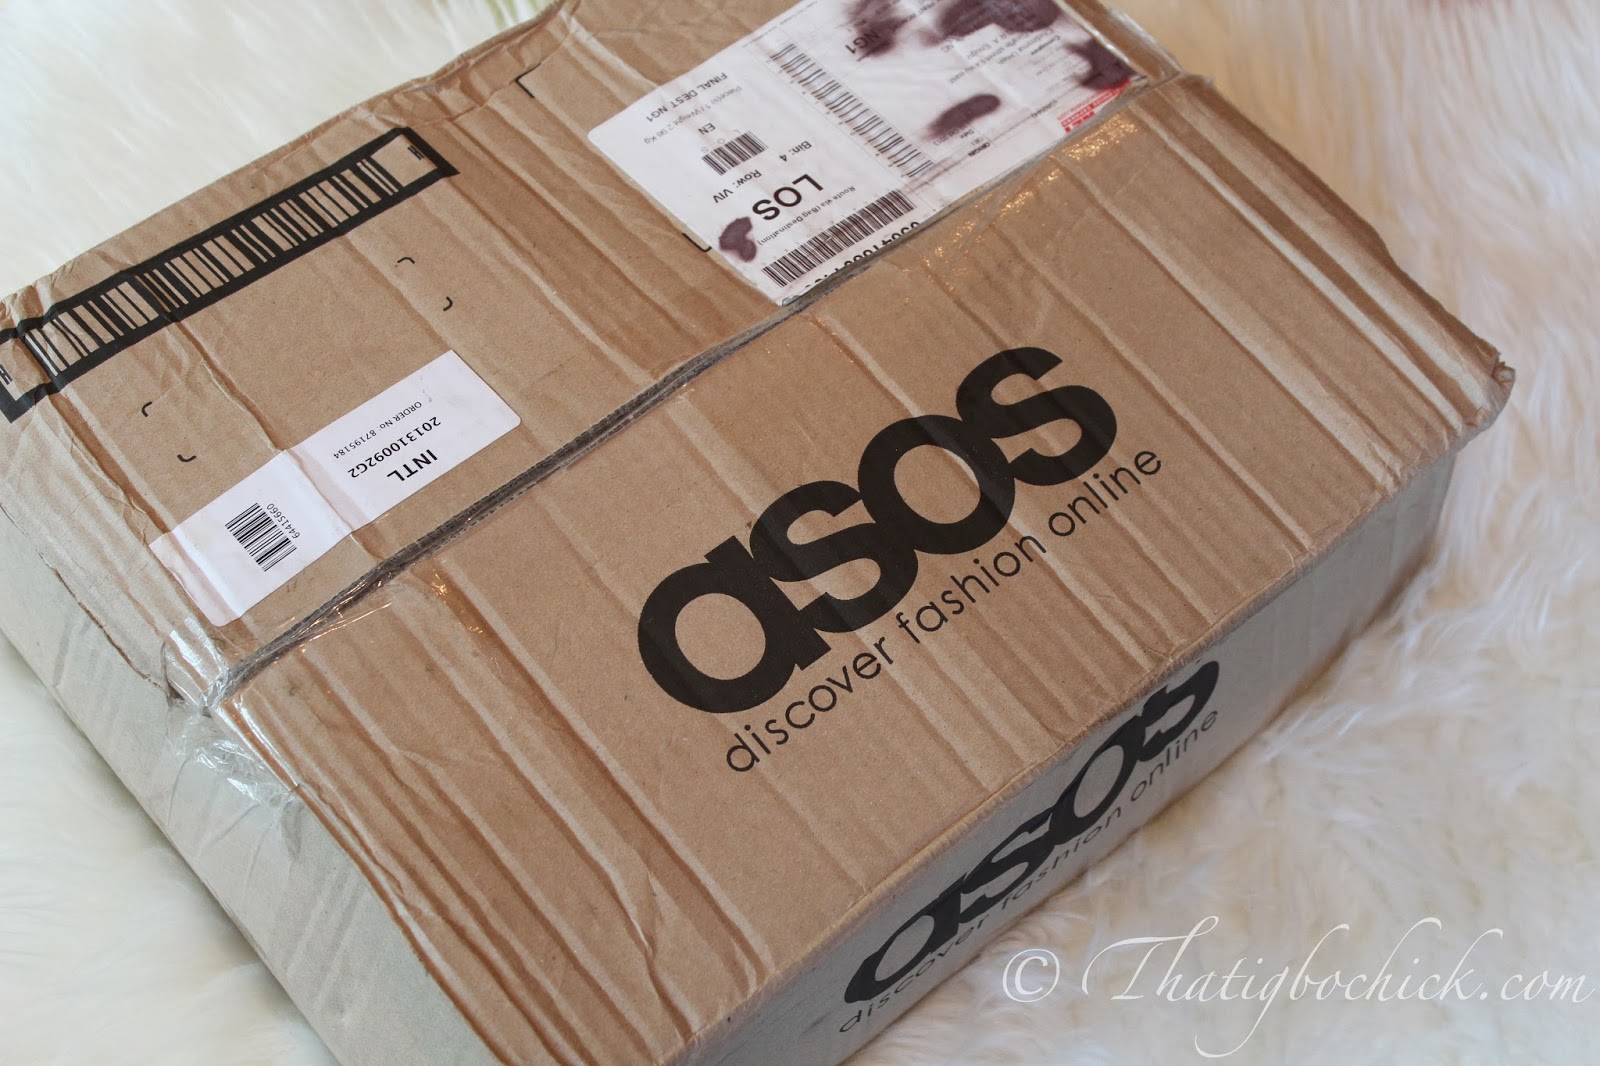 Tuesday, 5 November 2013 They deliver - Asos